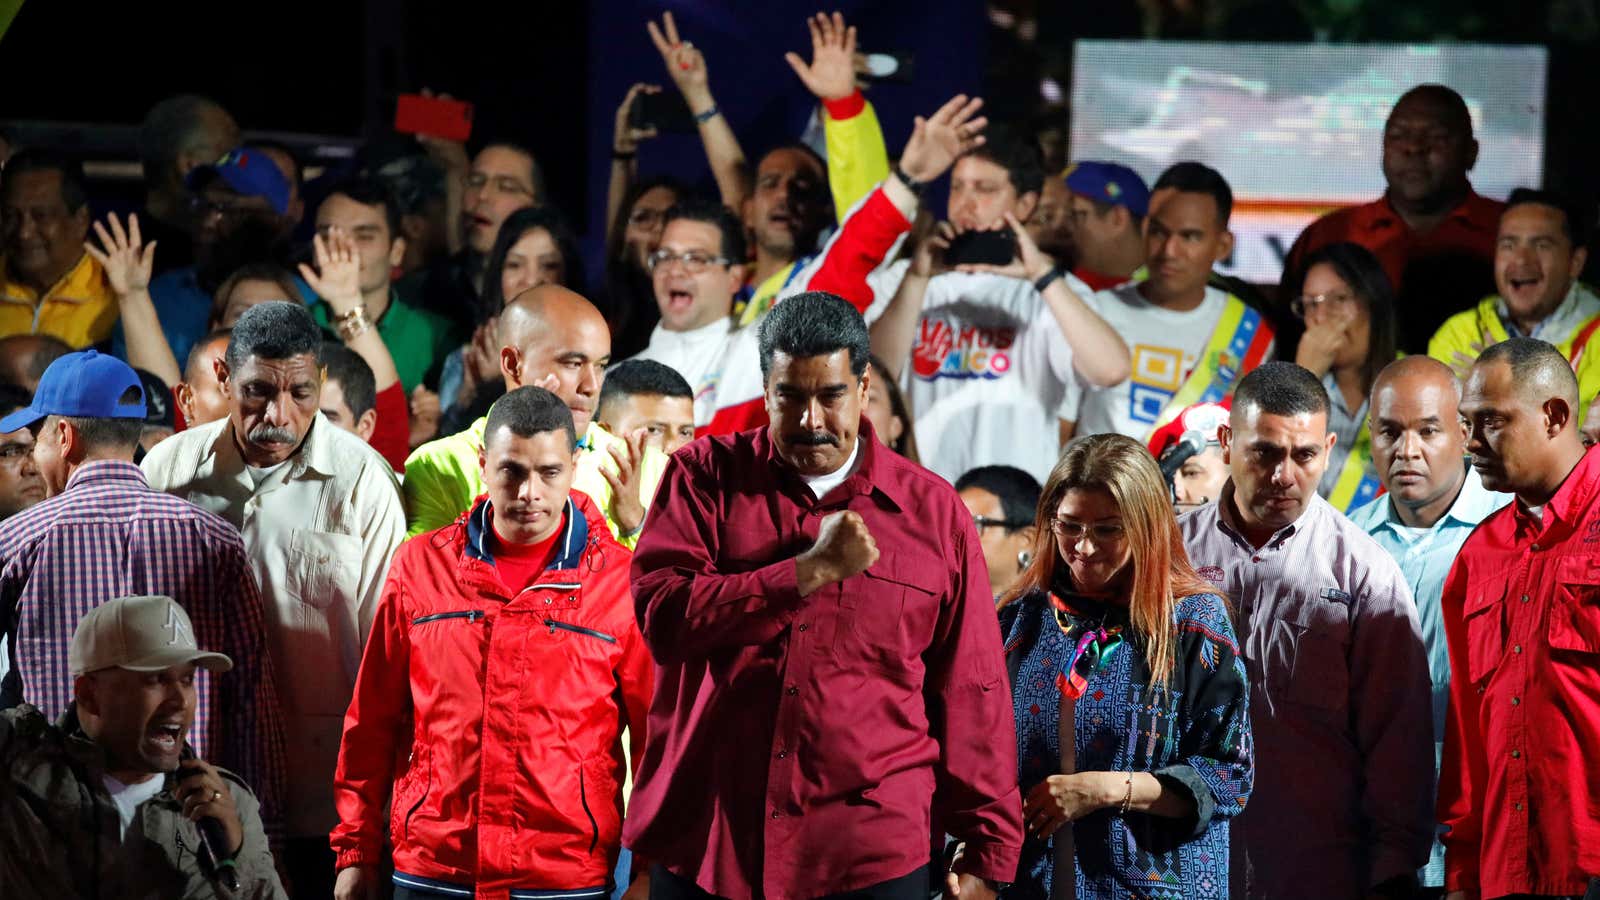 Nicolás Maduro: “The revolution is here to stay!”